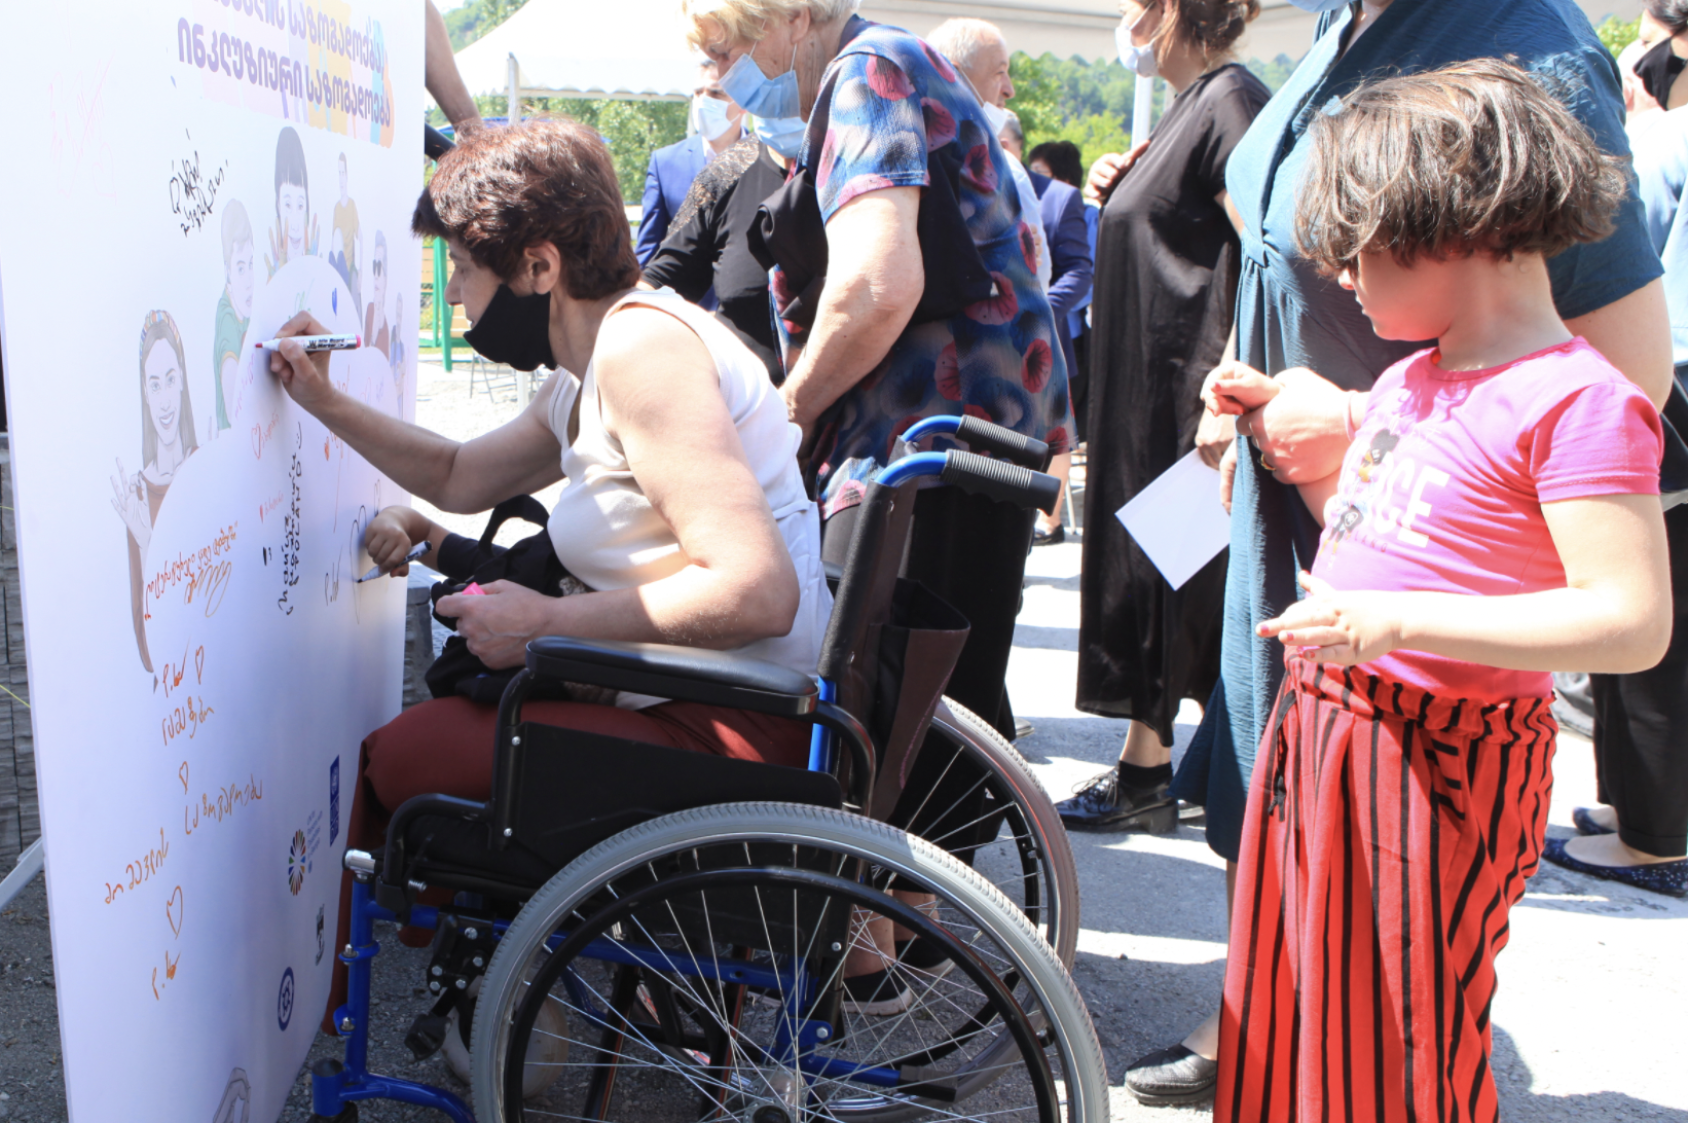 A woman in a wheel chair signs a poster board while several people stand nearby.